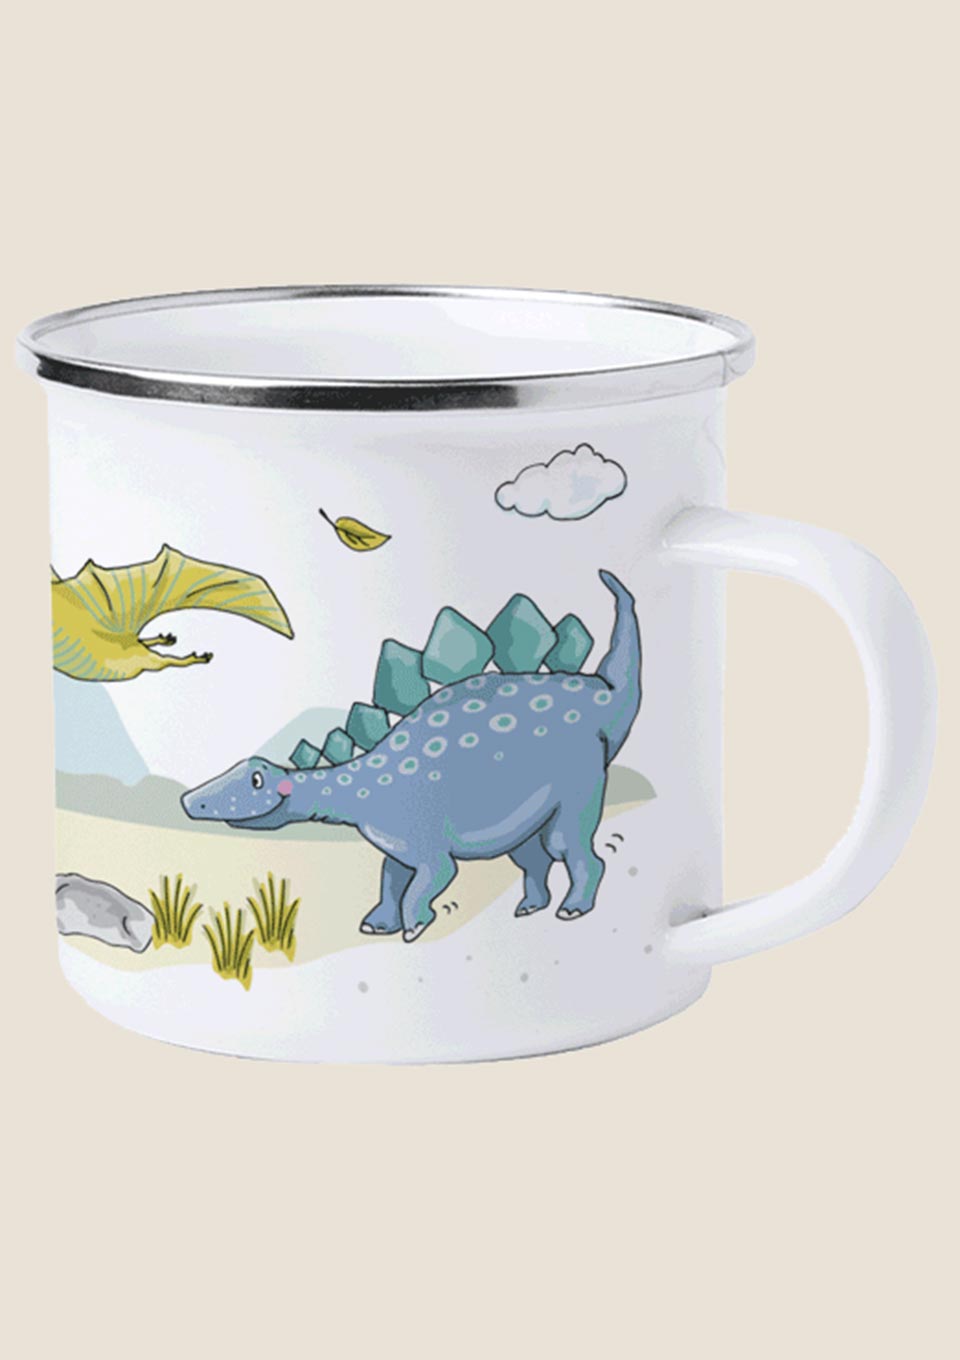 krima & isa Emaille Becher "Dinos" - tiny-boon.com